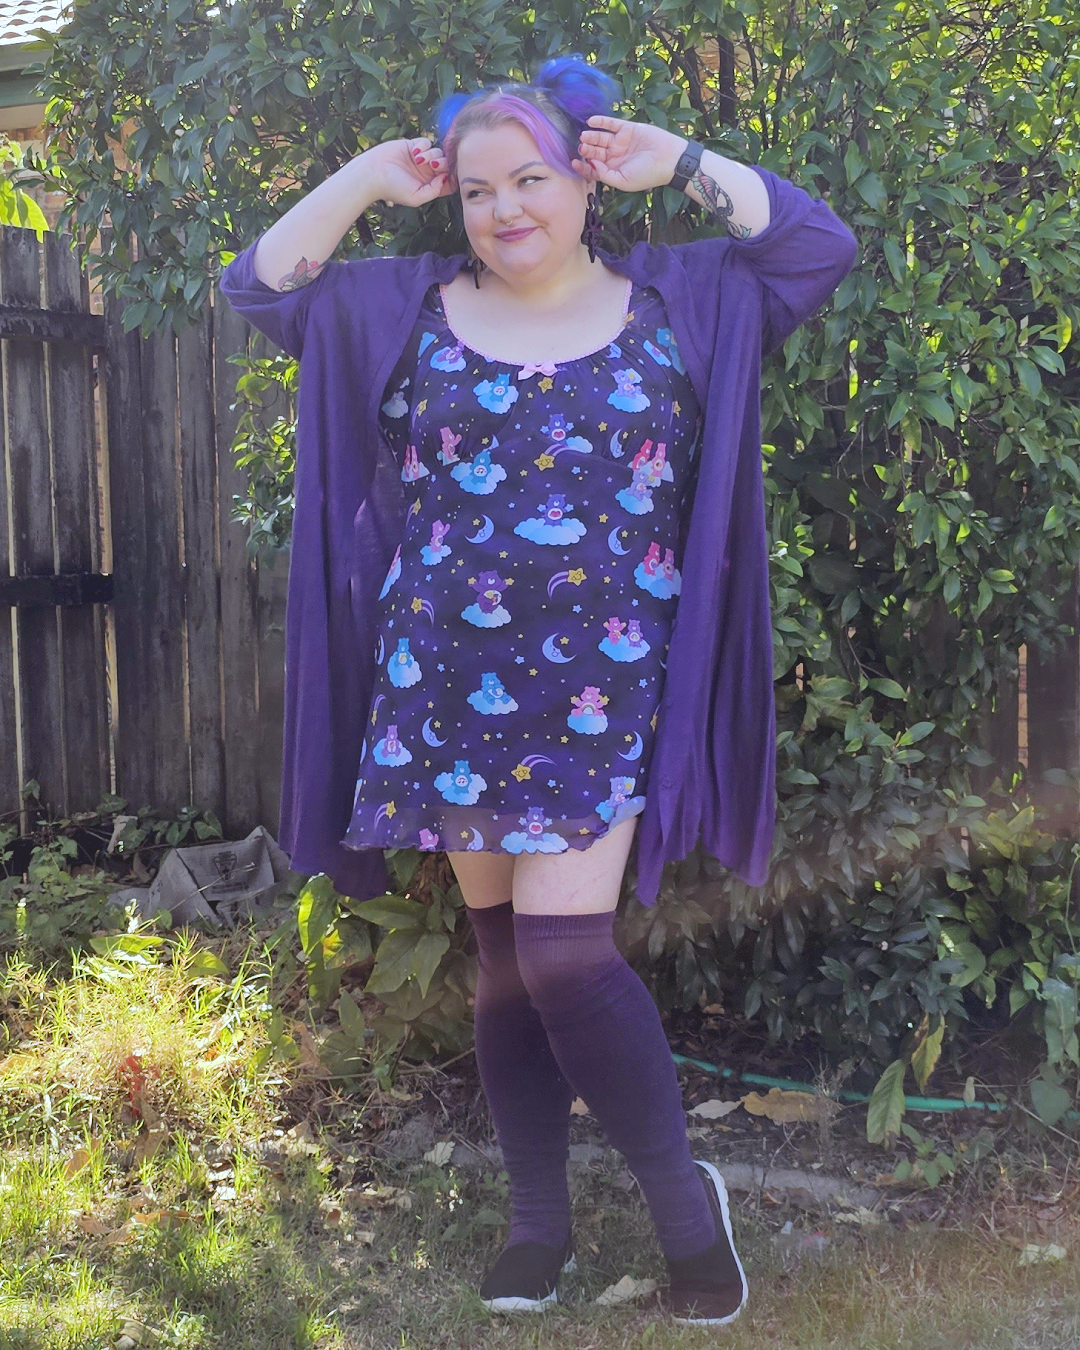 Plus sized girl with pink and purple hear wearing a purple care bears dress